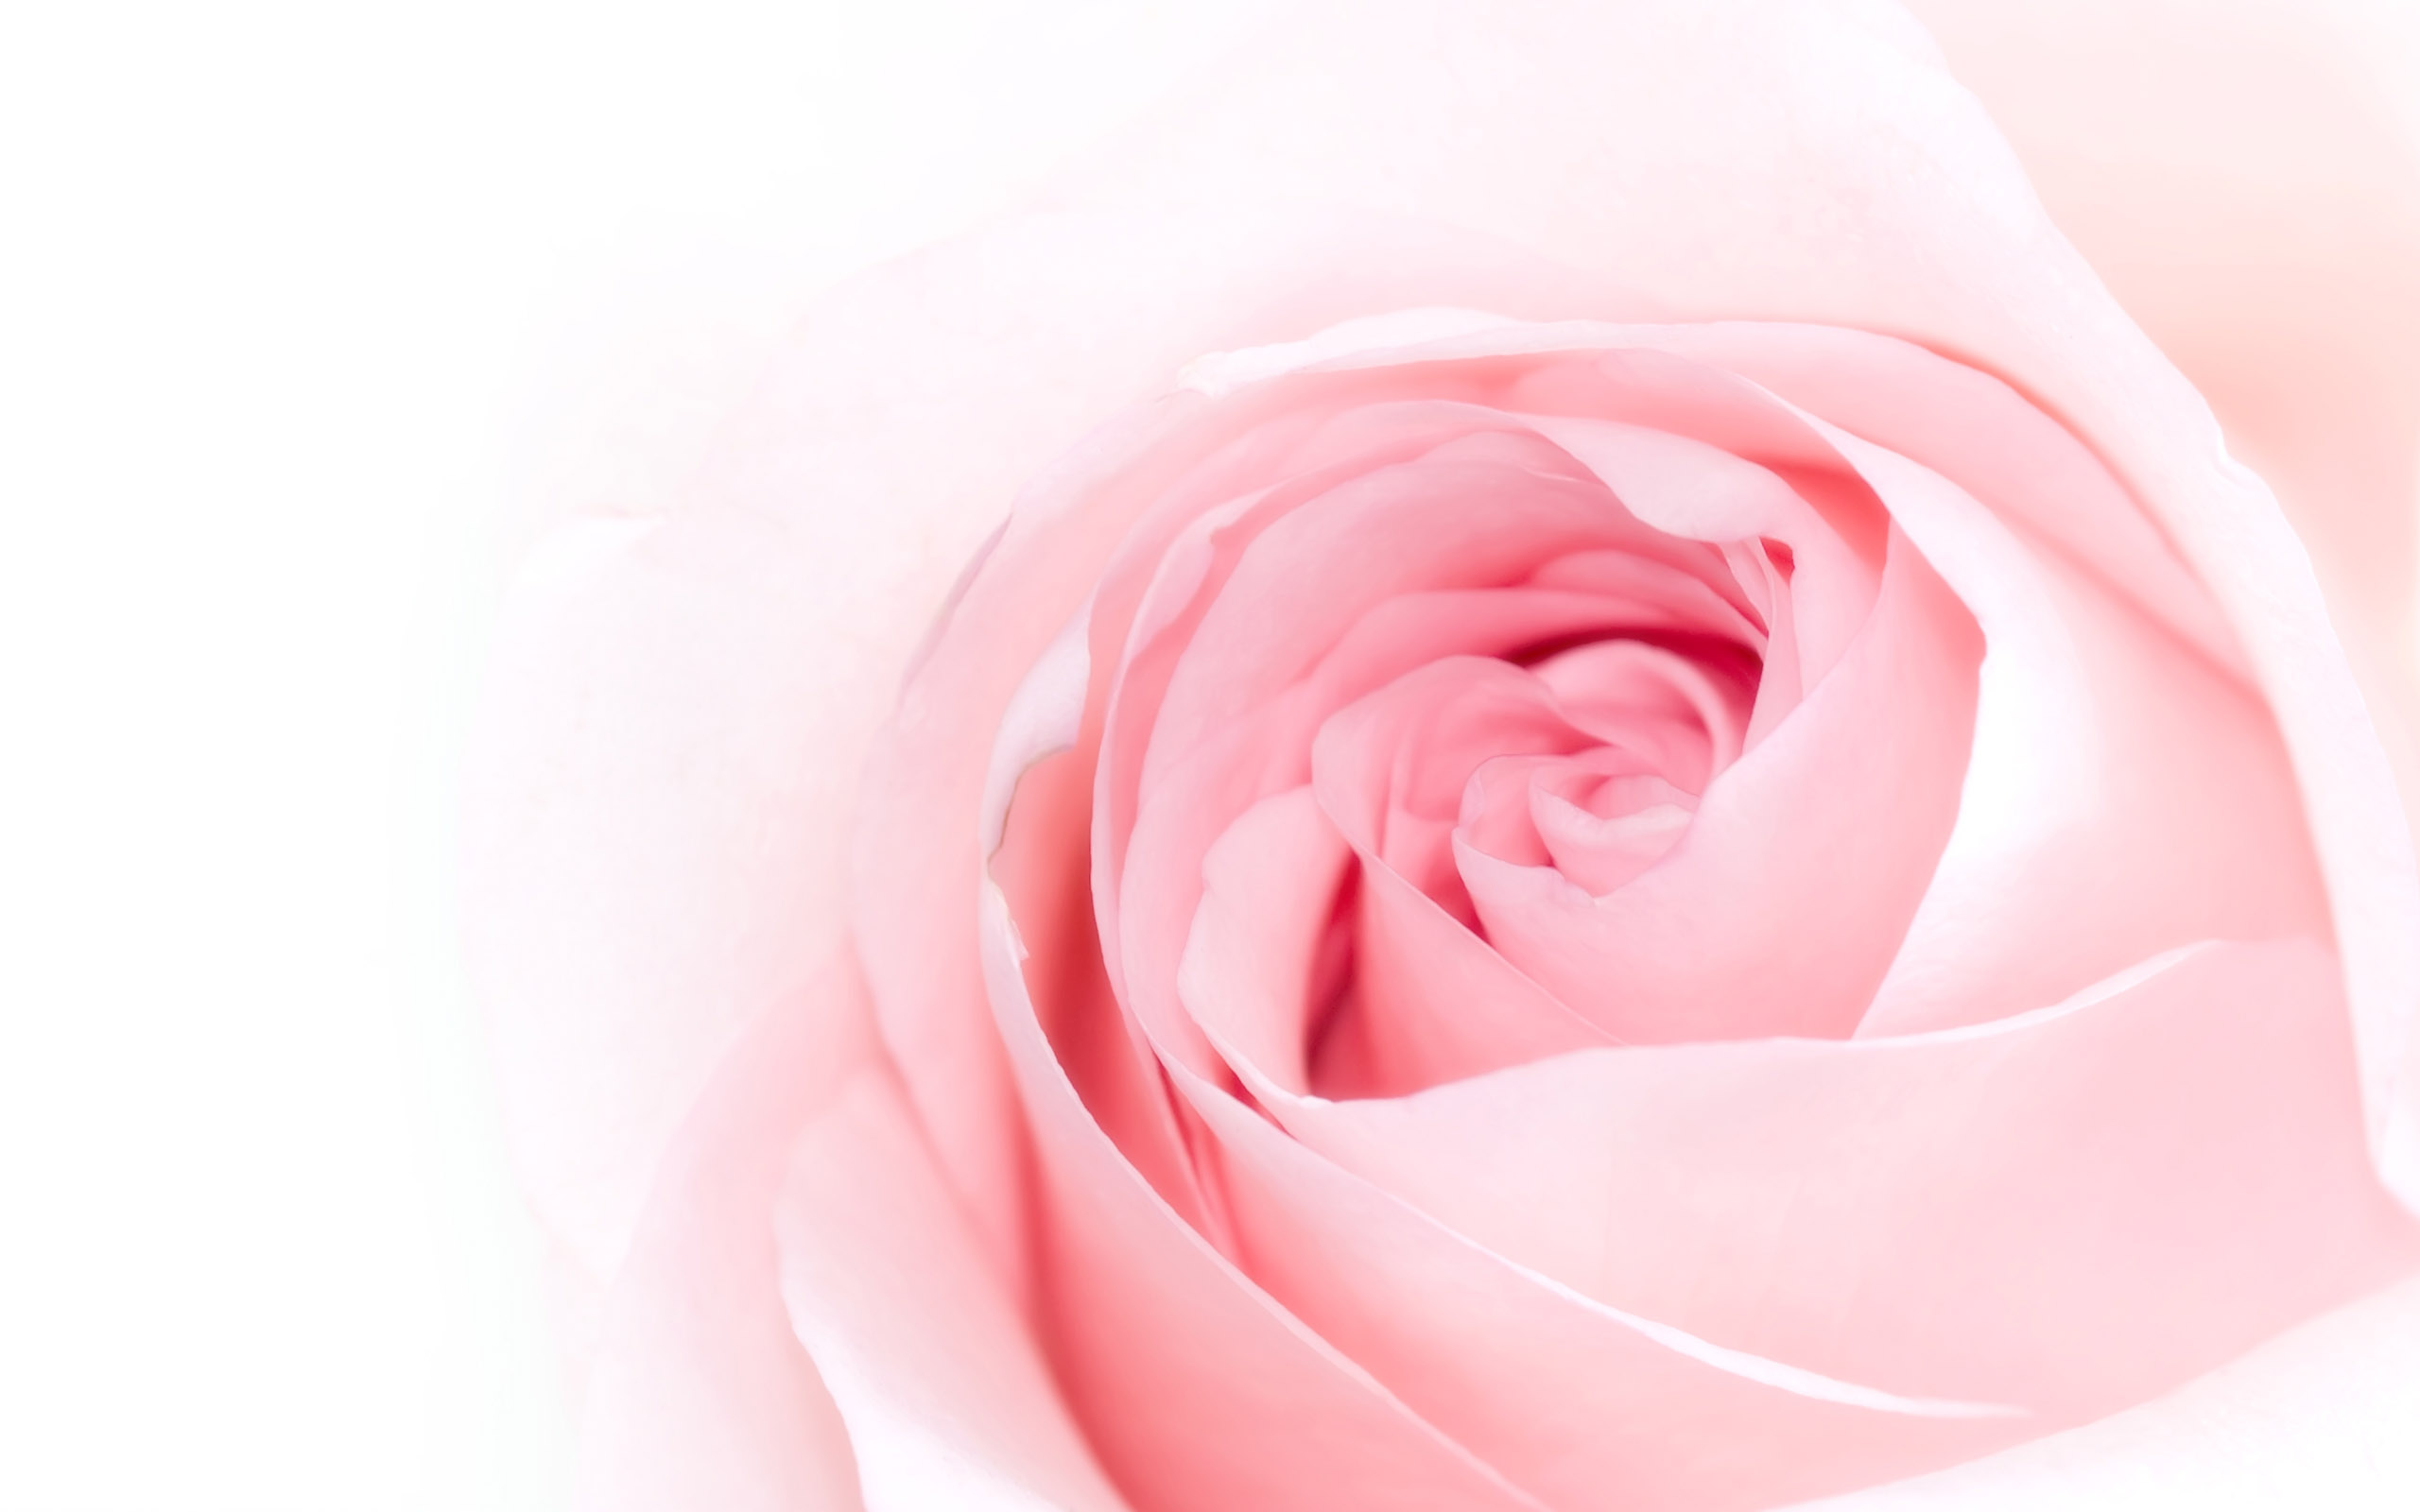 Rose Close Up Wallpaper High Definition Quality Widescreen